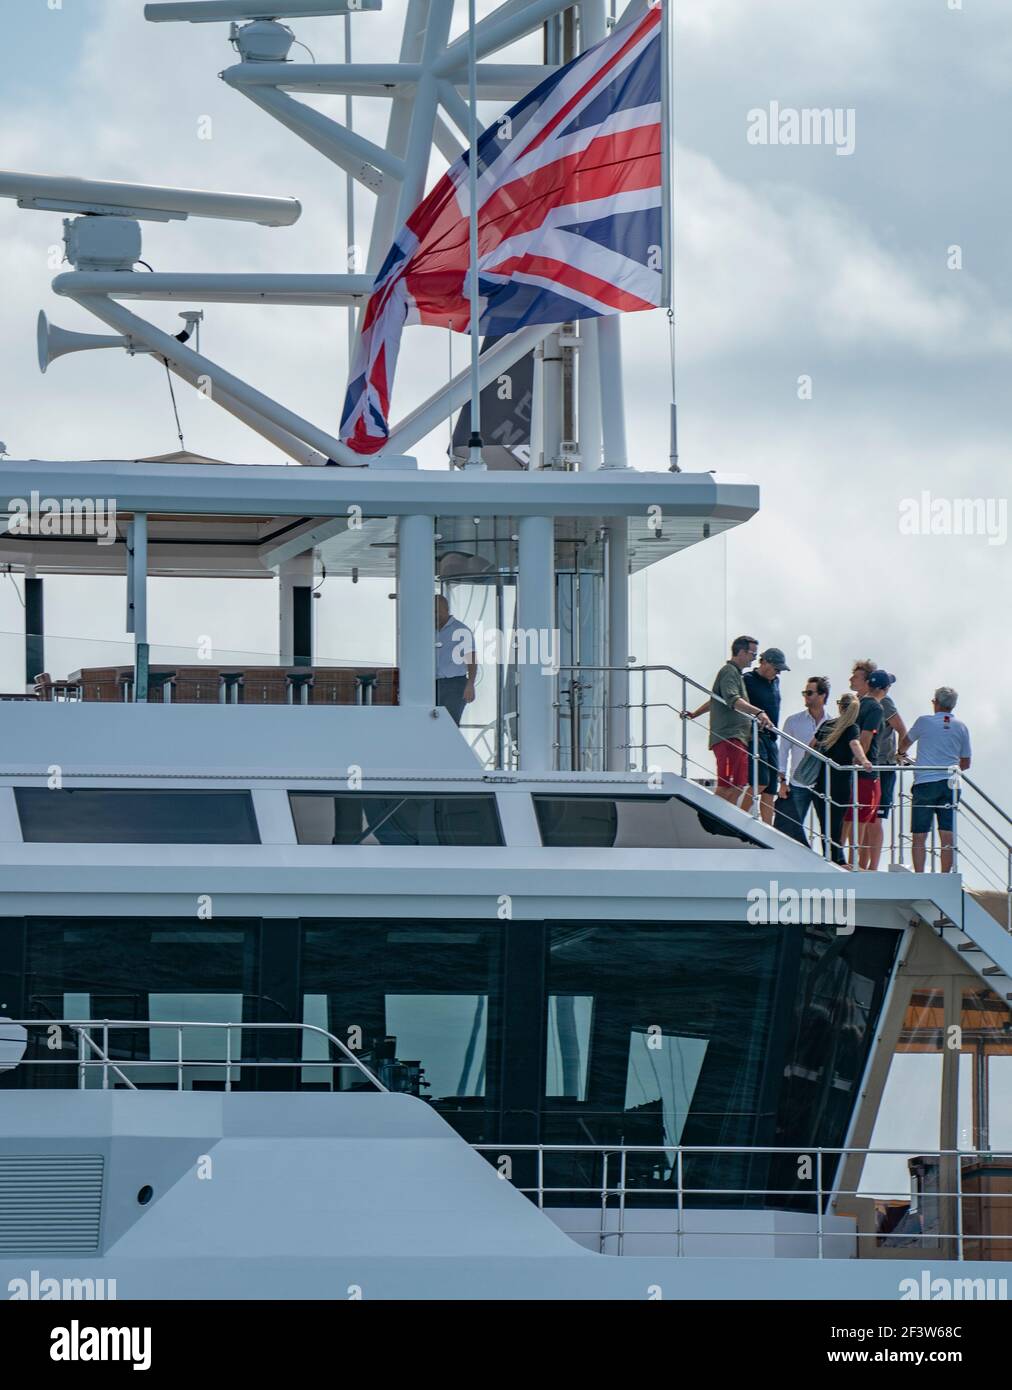 Auckland, New Zealand, 17 March, 2021 -  Owner of Ineos Team UK sailing team British billionaire Sir Jim Ratcliffe (3rd from right) prepares to view the final race of the 36th America's Cup on Auckland's Waitemata Harbour from his $100,000,000 super yacht Sherpa. Pictured with him are Ineos Team UK's founder and skipper Sir Ben Ainslie (white shirt)i with his wife Lady Ainslie (Georgie Thompson) and other guests. Following  Team New Zealand's (ETNZ) 7-3 victory over Italian challenger  Luna Rossa, Ineos Team UK are now believed to be the America's Cup Challenger of Record and will work with ET Stock Photo